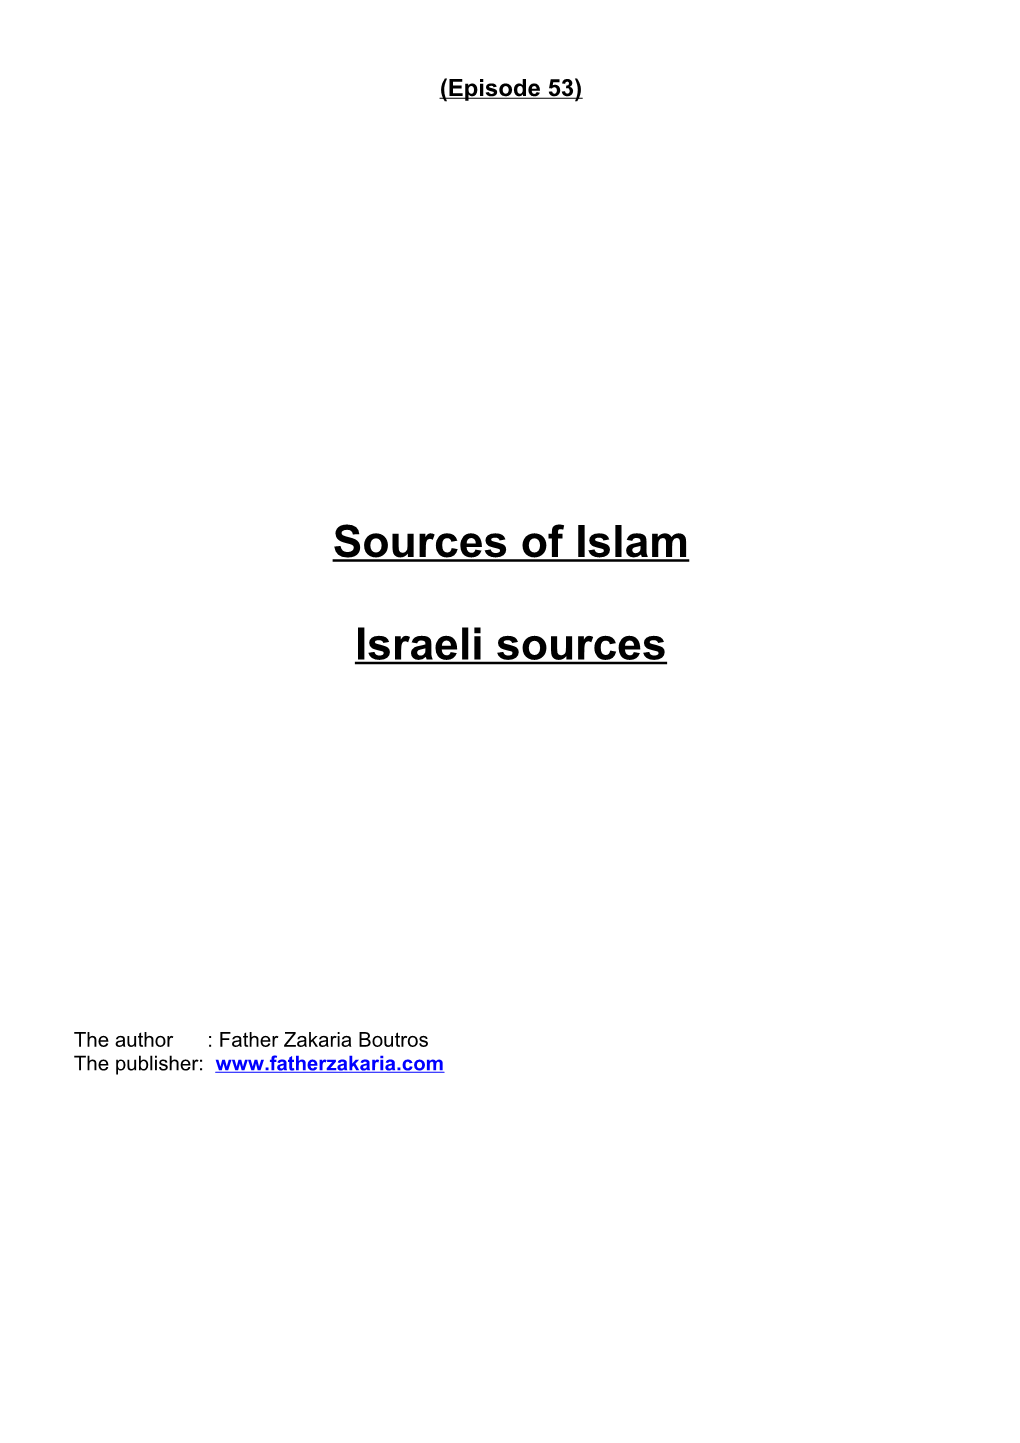 Sources of Islam